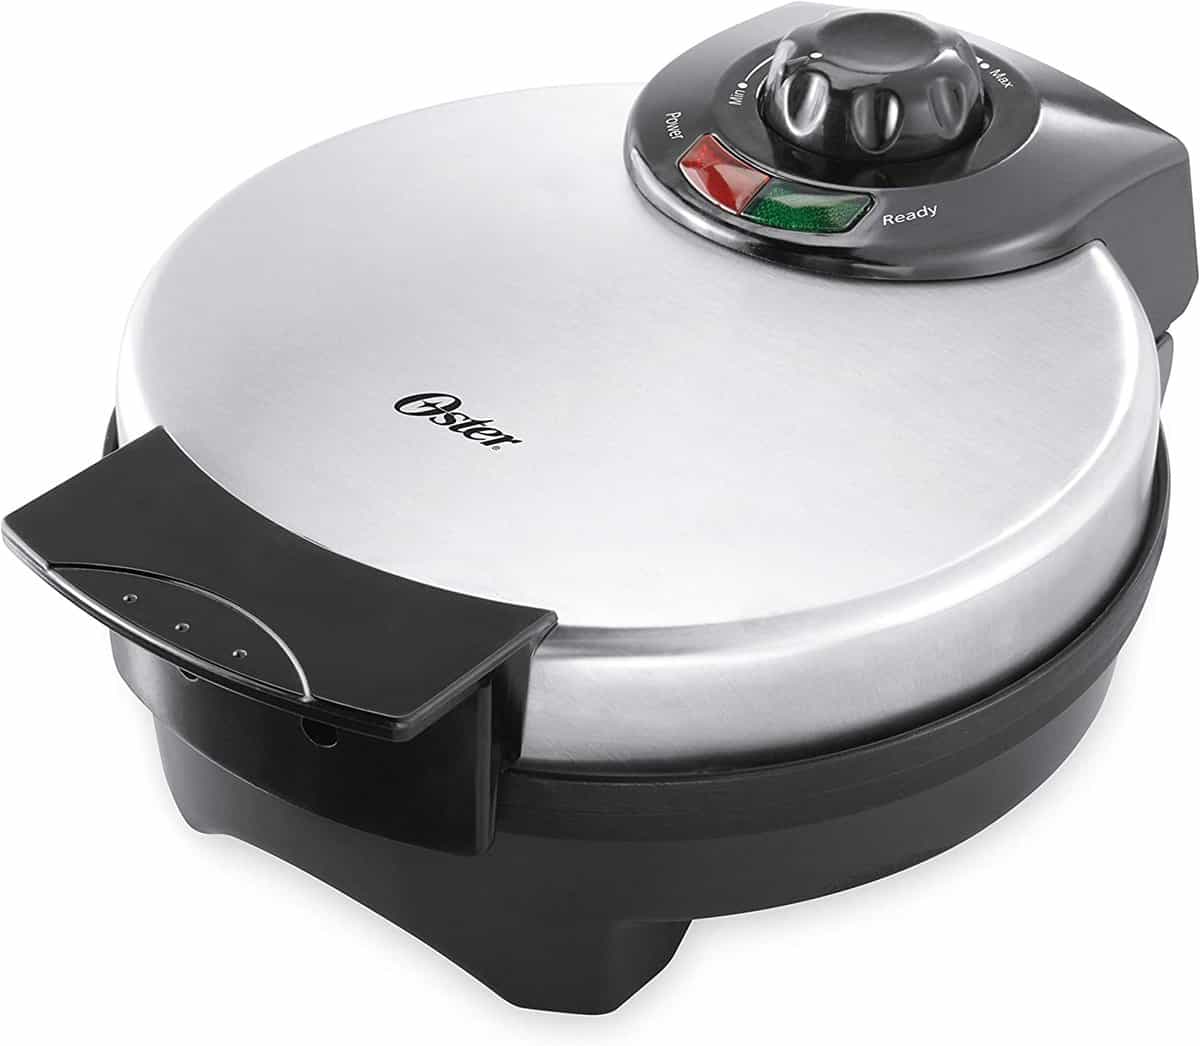 Best Reviewed Waffle Maker: Oster Belgian Waffle Maker in Stainless Steel Round.